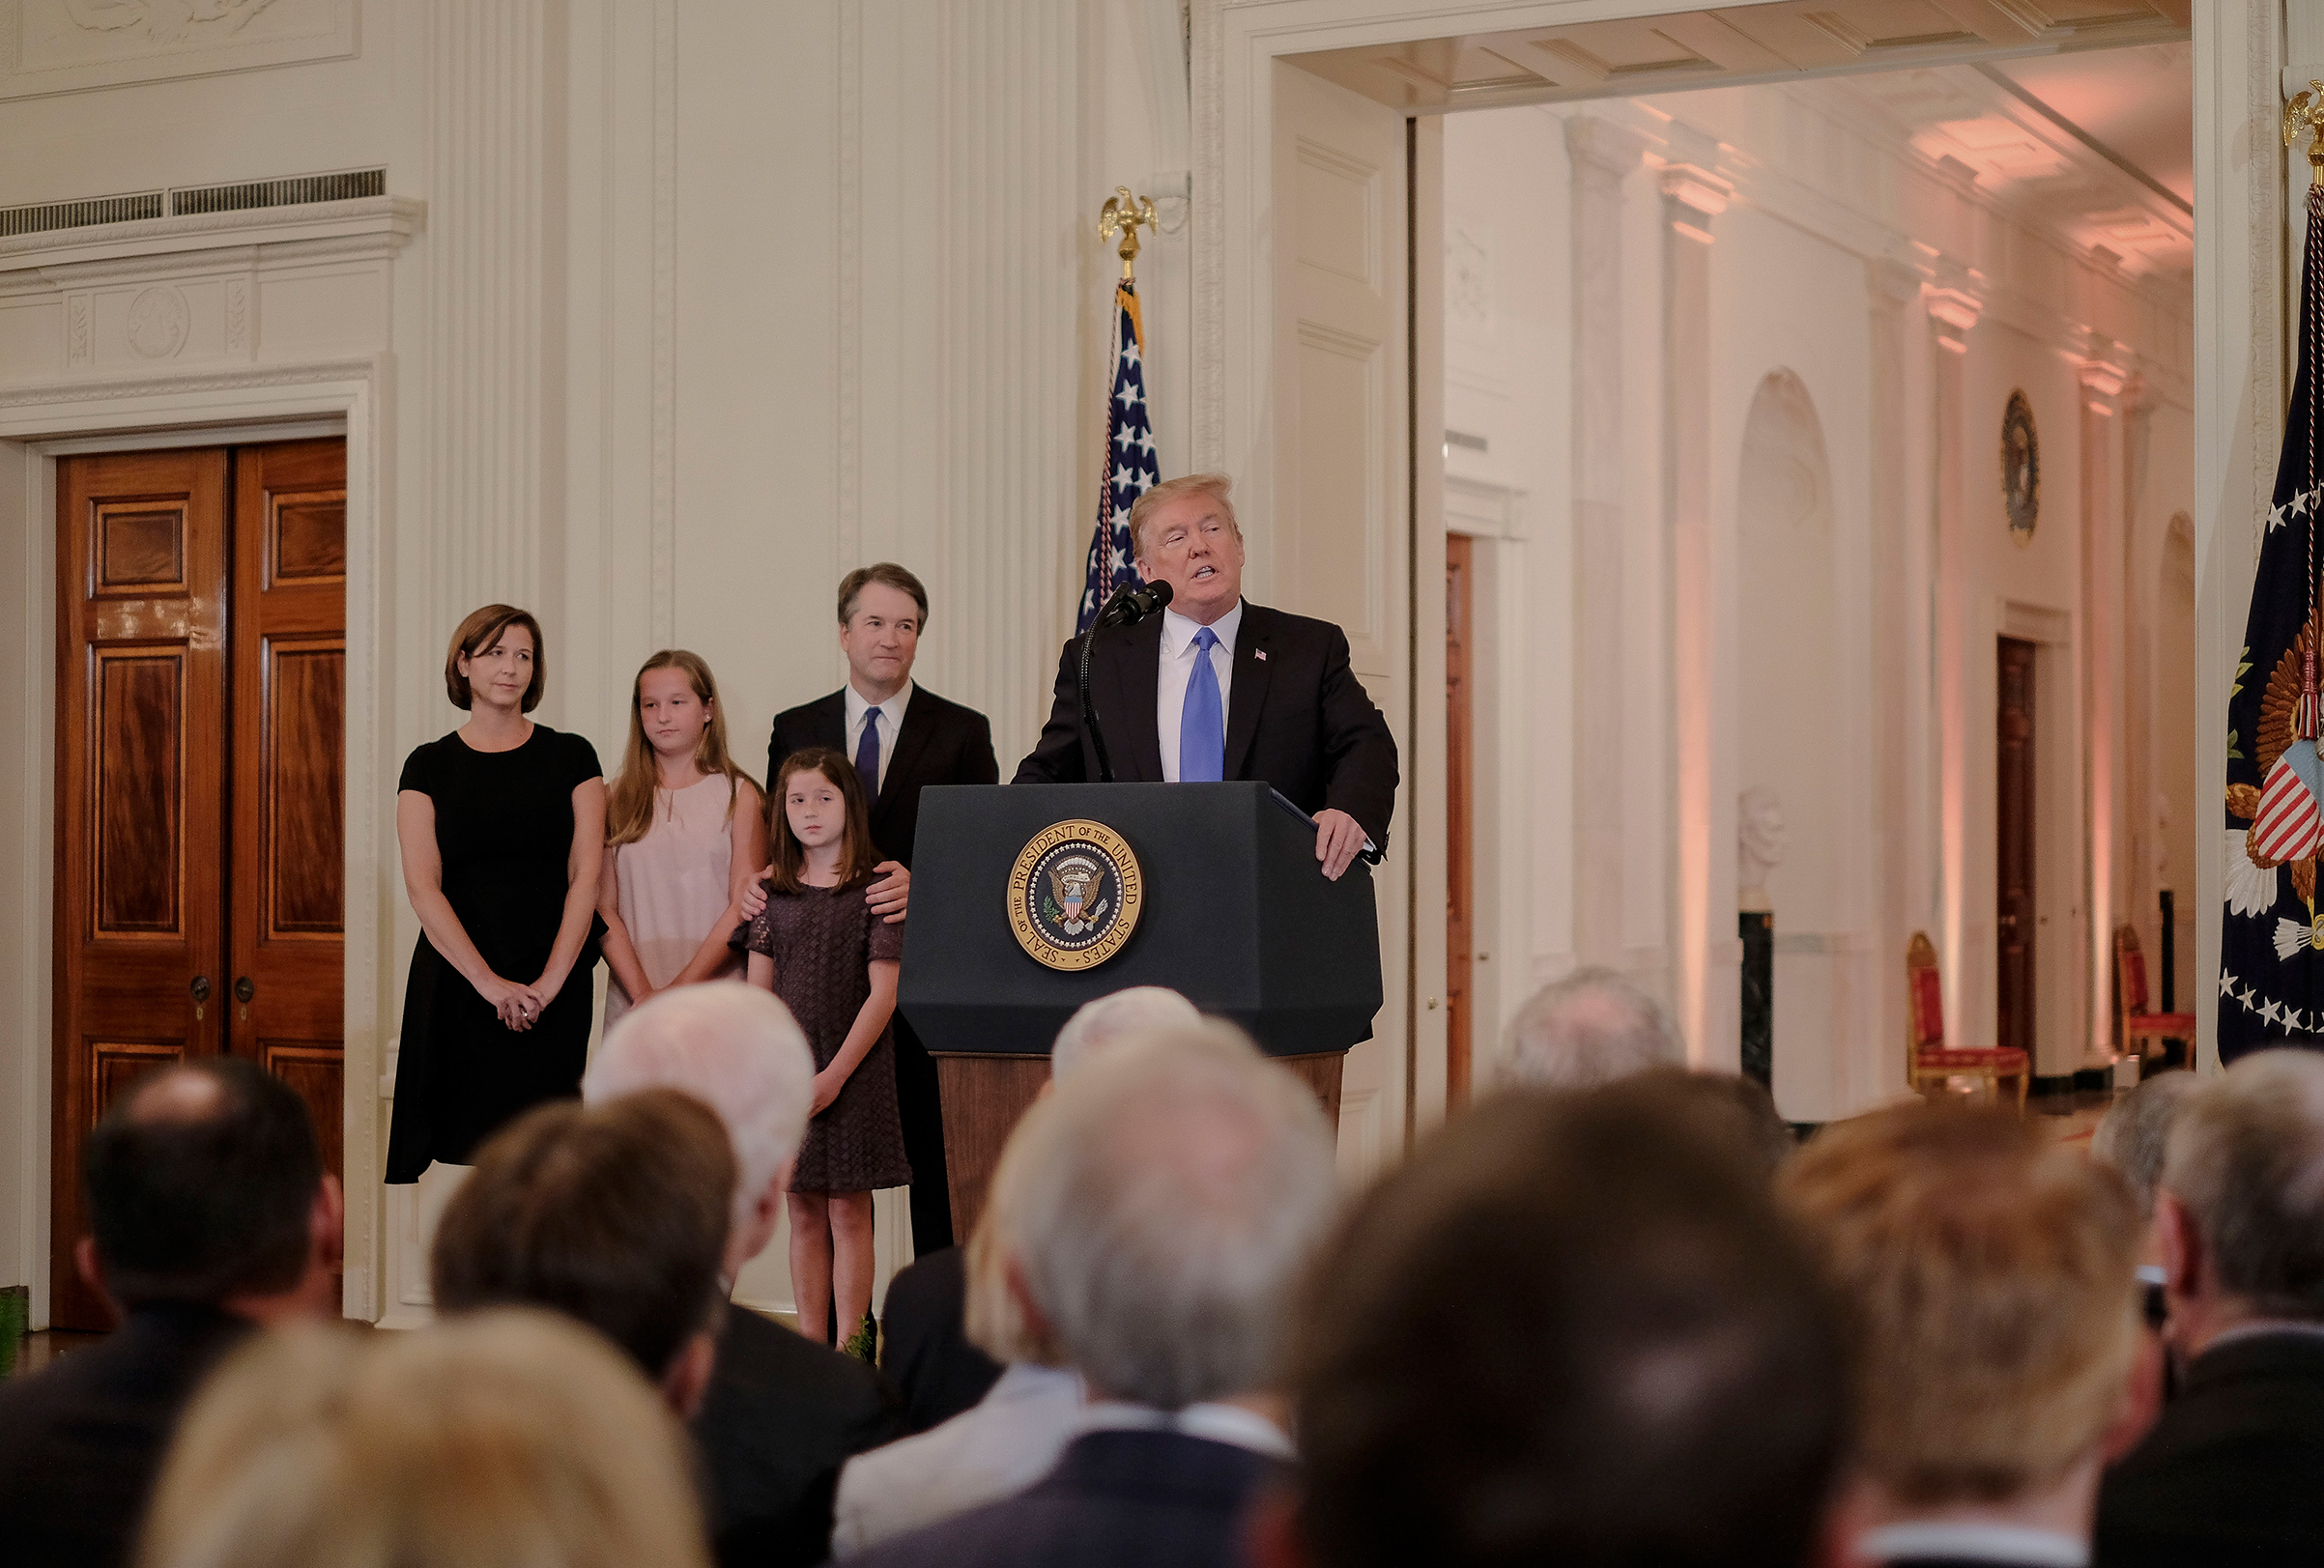 President Trump nominates Judge Brett Kavanaugh to the Supreme Court during an event in the East Room of the White House in Washington on July 9, 2018. (Gabriella Demczuk for TIME)